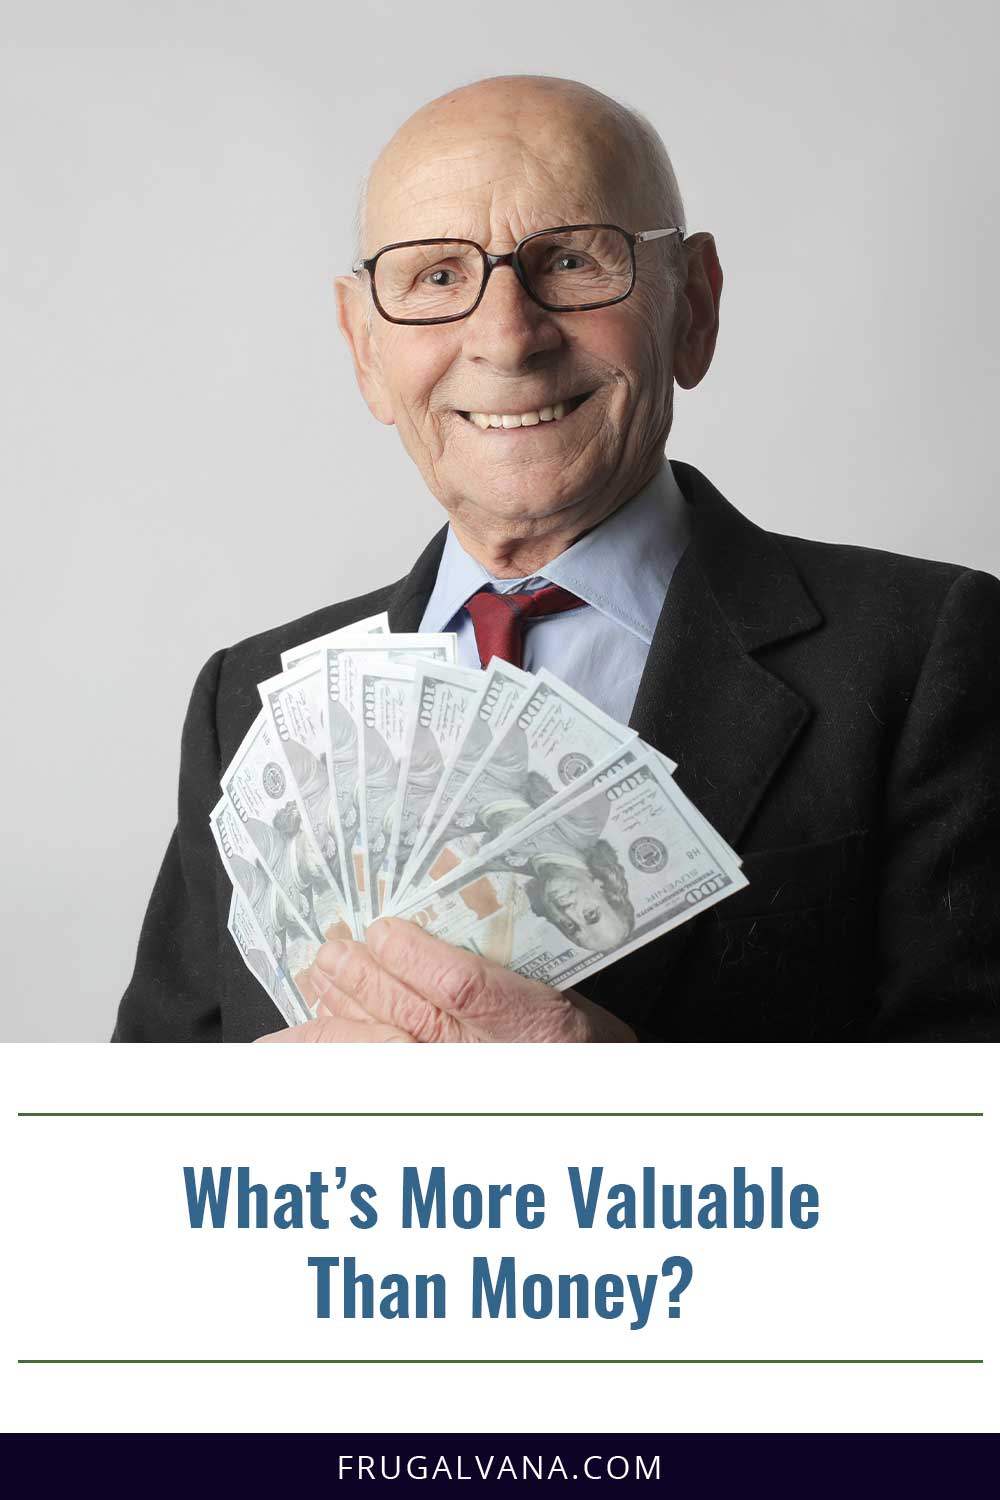 What’s More Valuable Than Money?